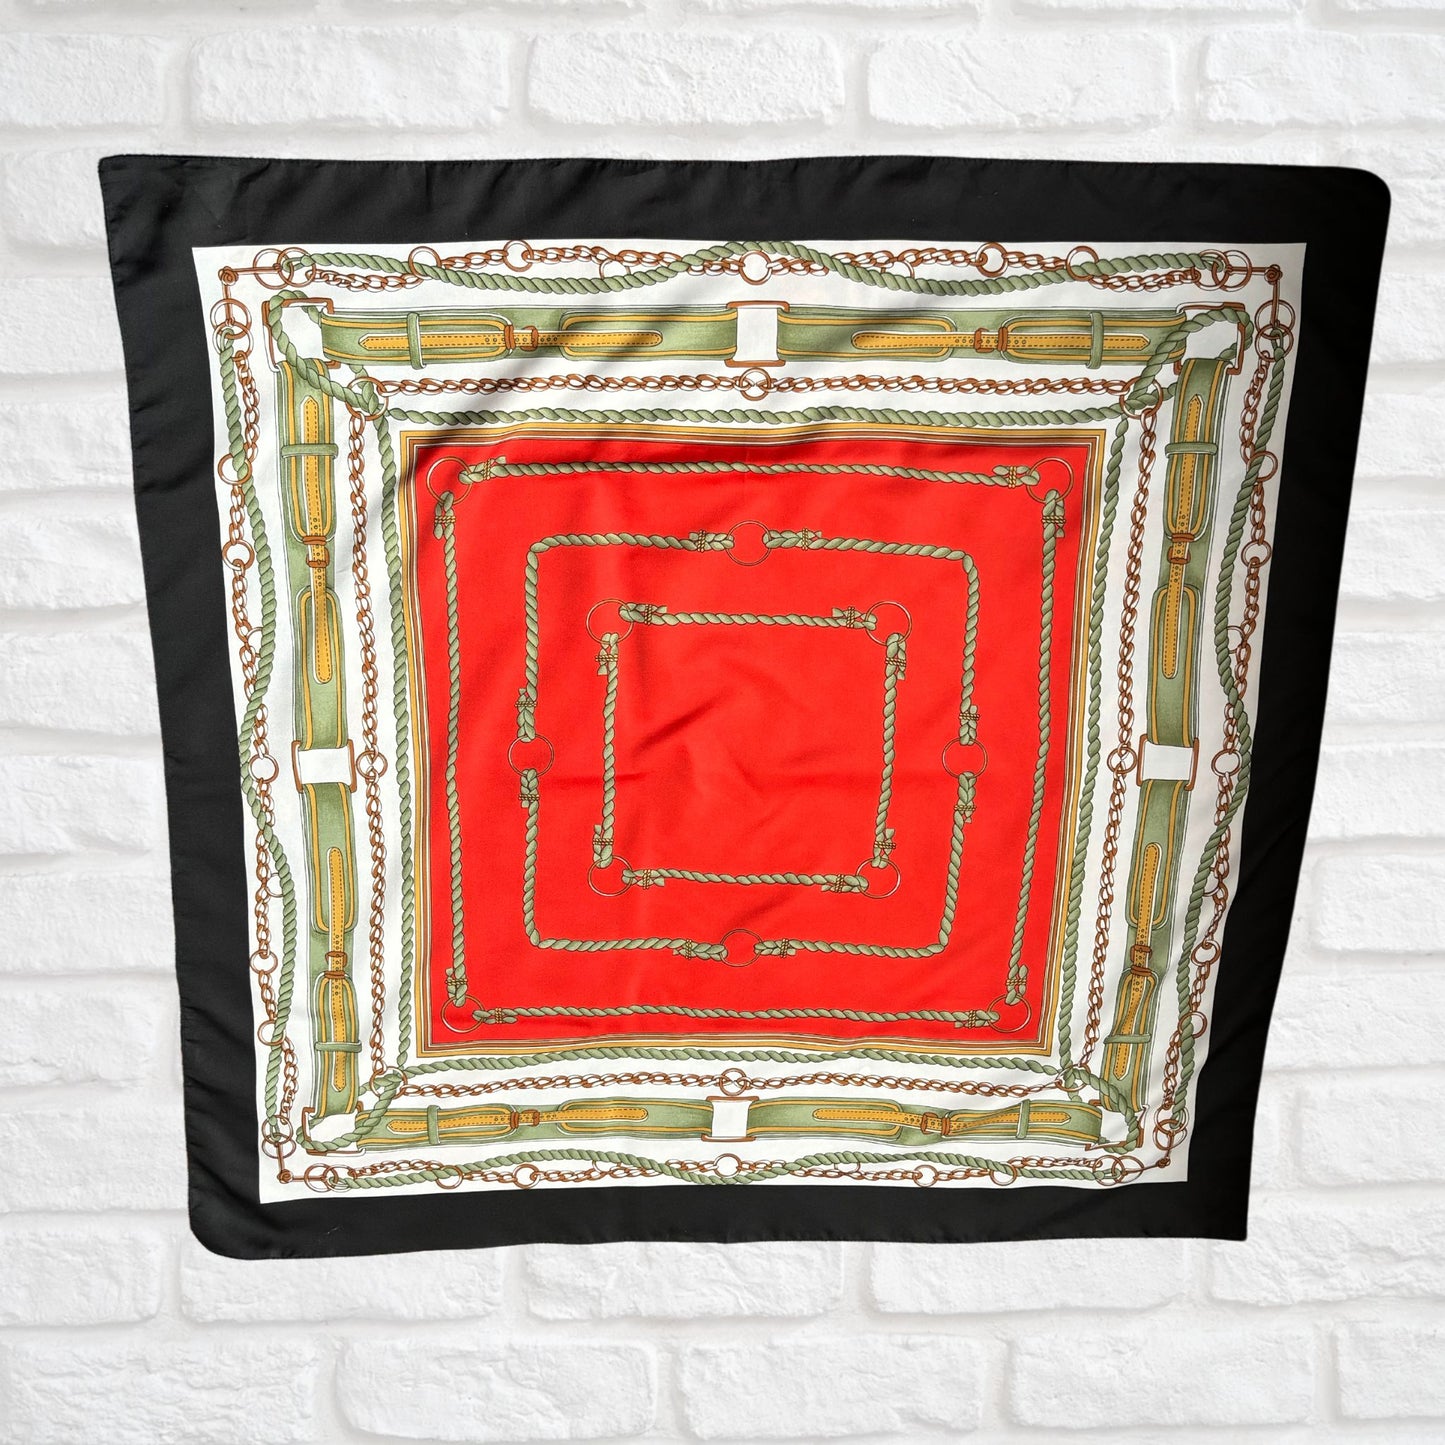 Black, White, Green, Red and Brown Equestrian Style Large Square Vintage Scarf. Great Gift idea